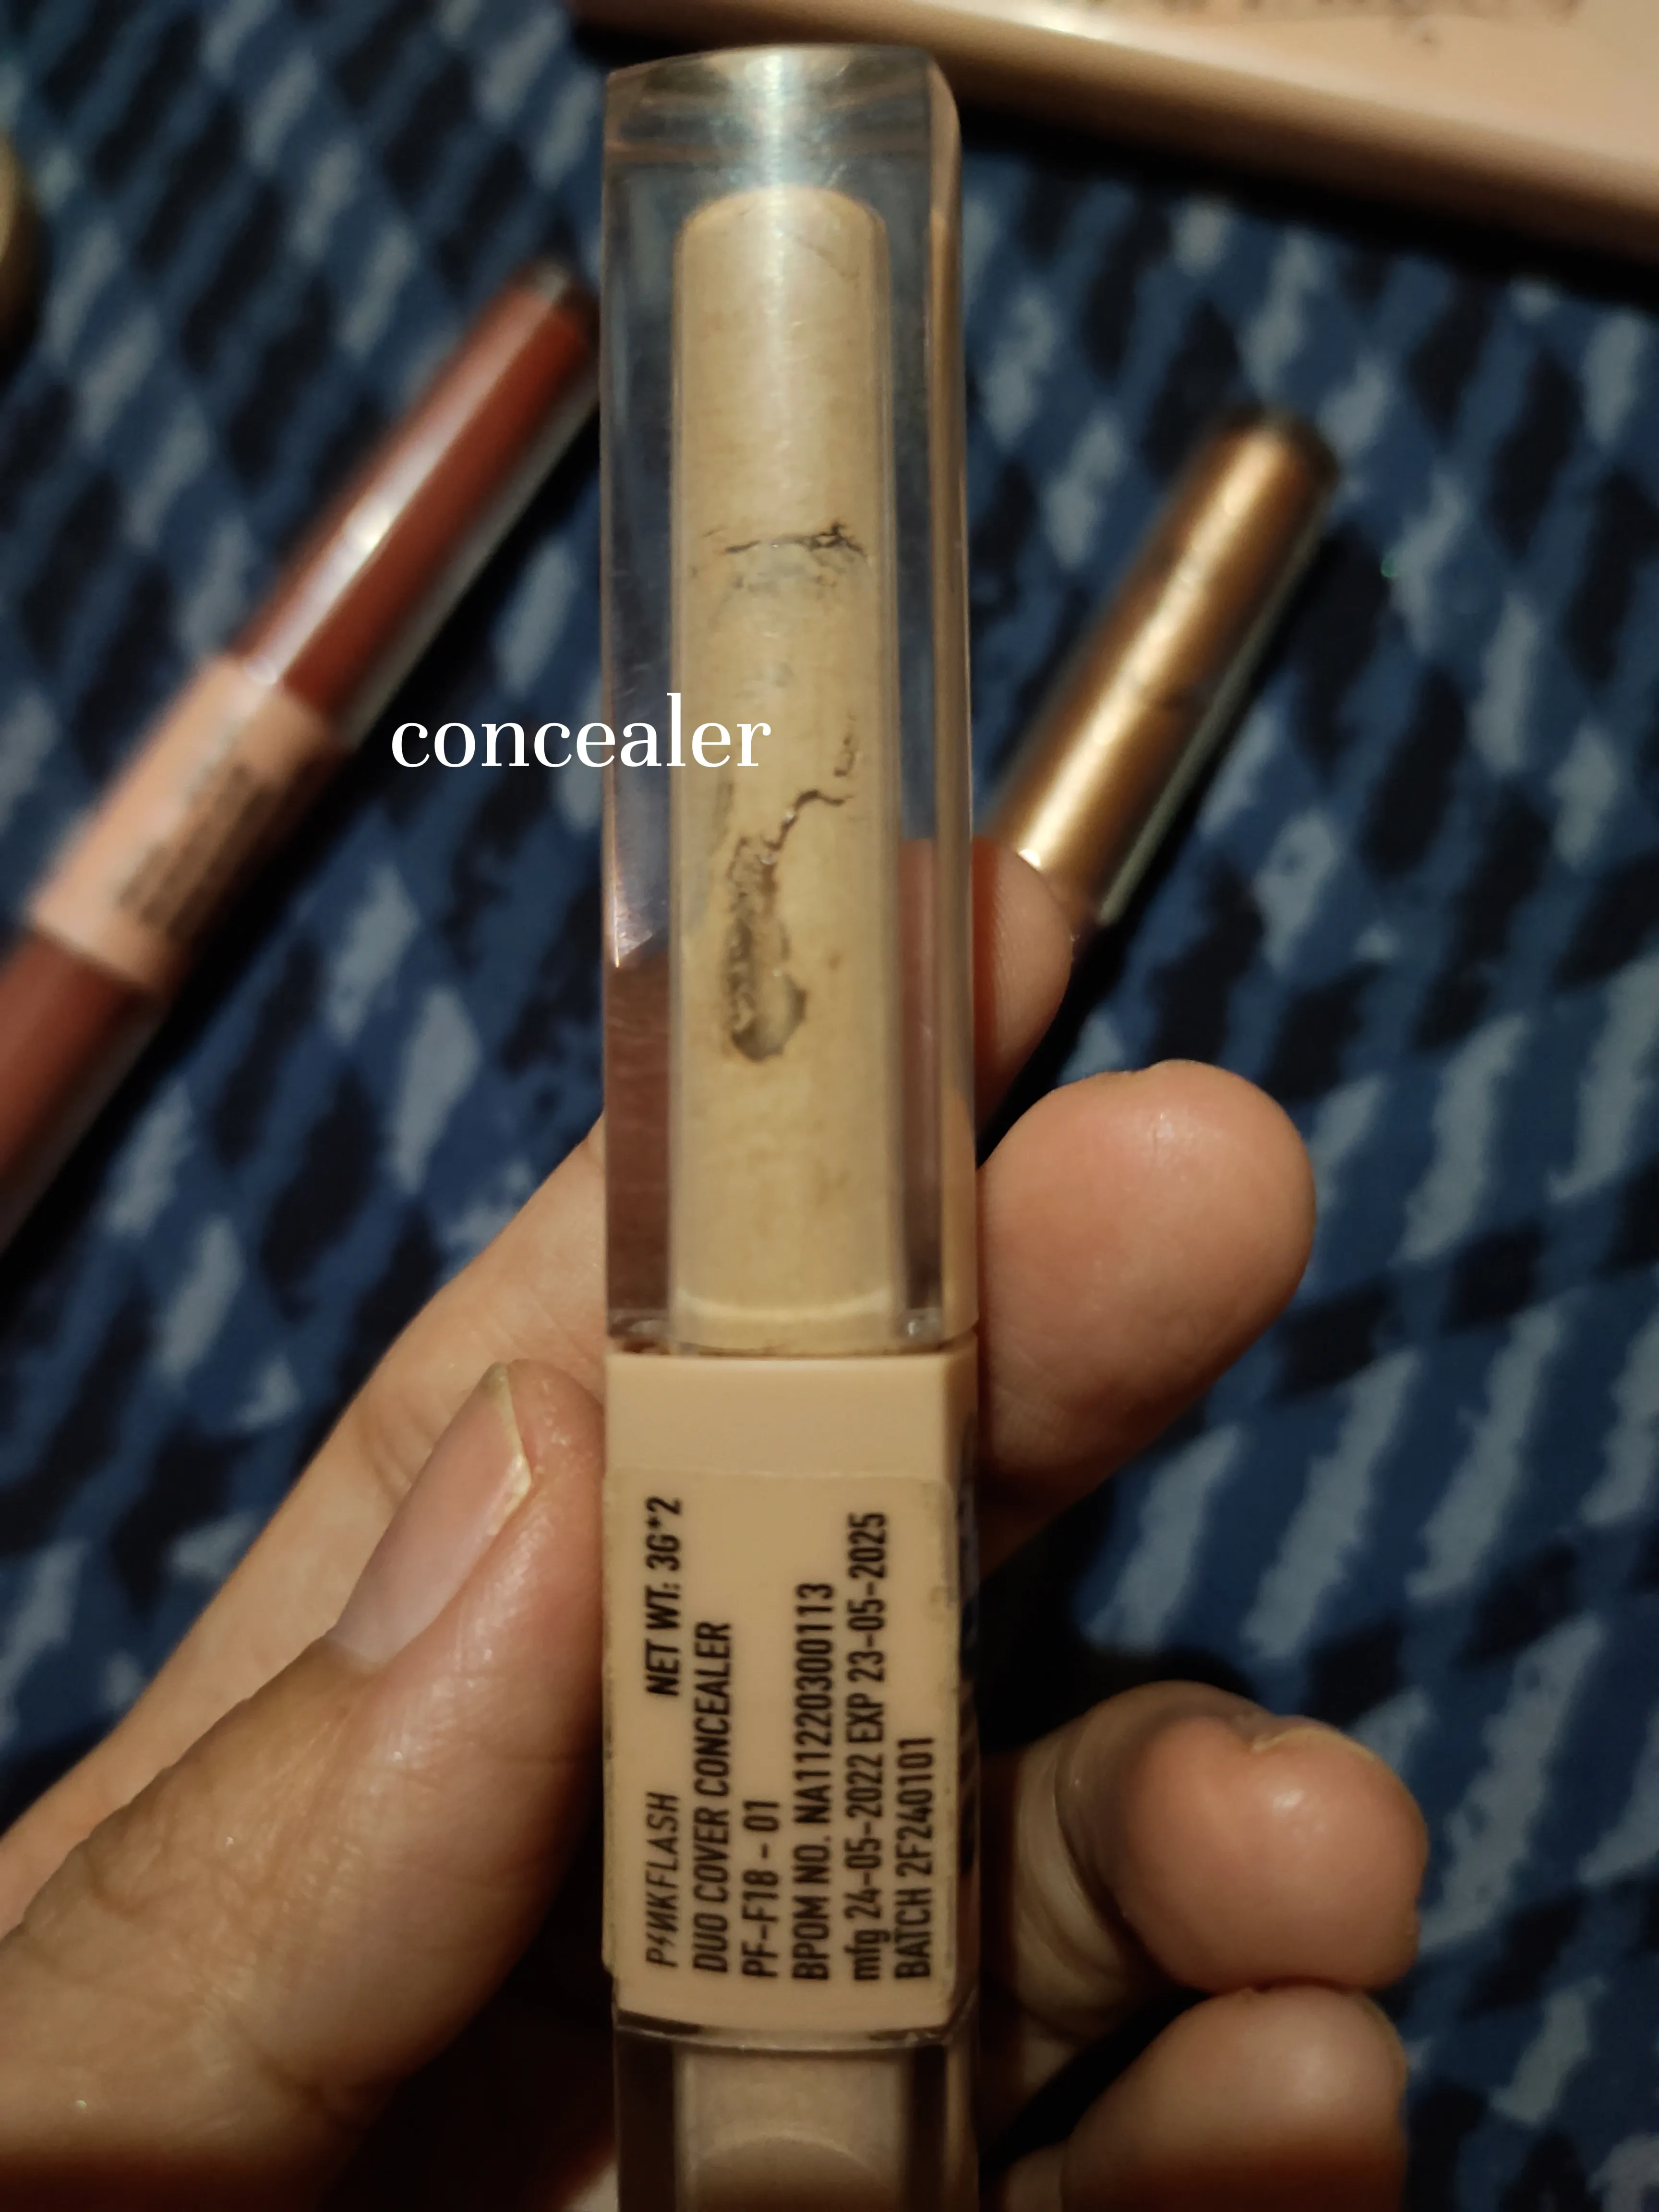 PINKFLASH - Duo Cover Concealer - 3 Colors